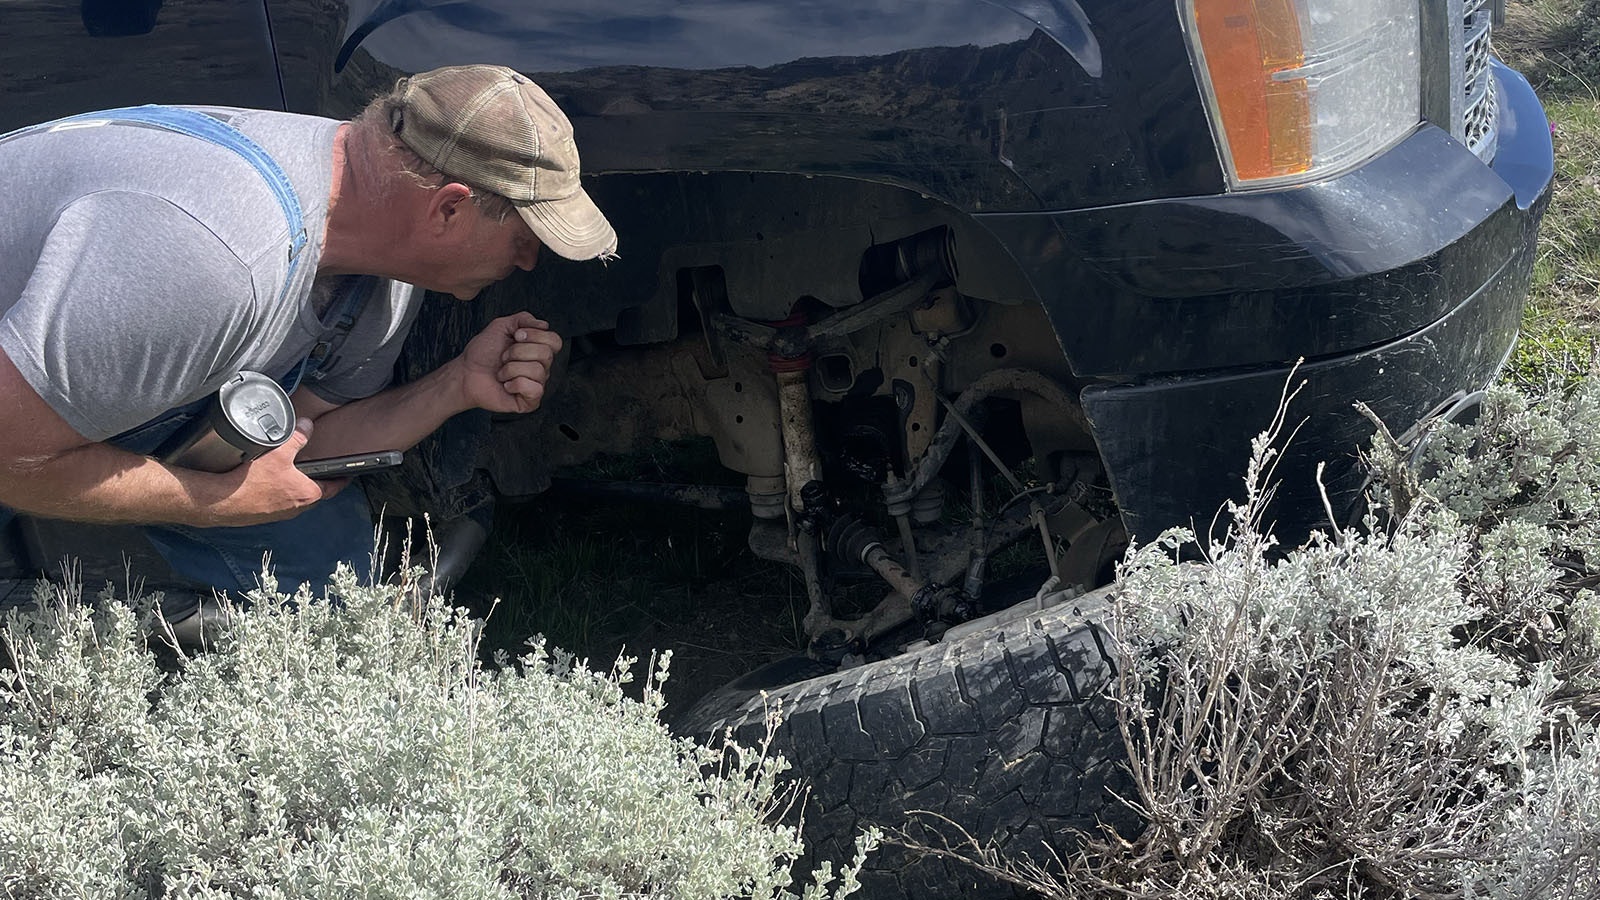 Park County resident Scot Stambaugh broke the axle on his pickup rushing to the scene of a side-by-side accident that left his daughter’s fiancée horribly injured.